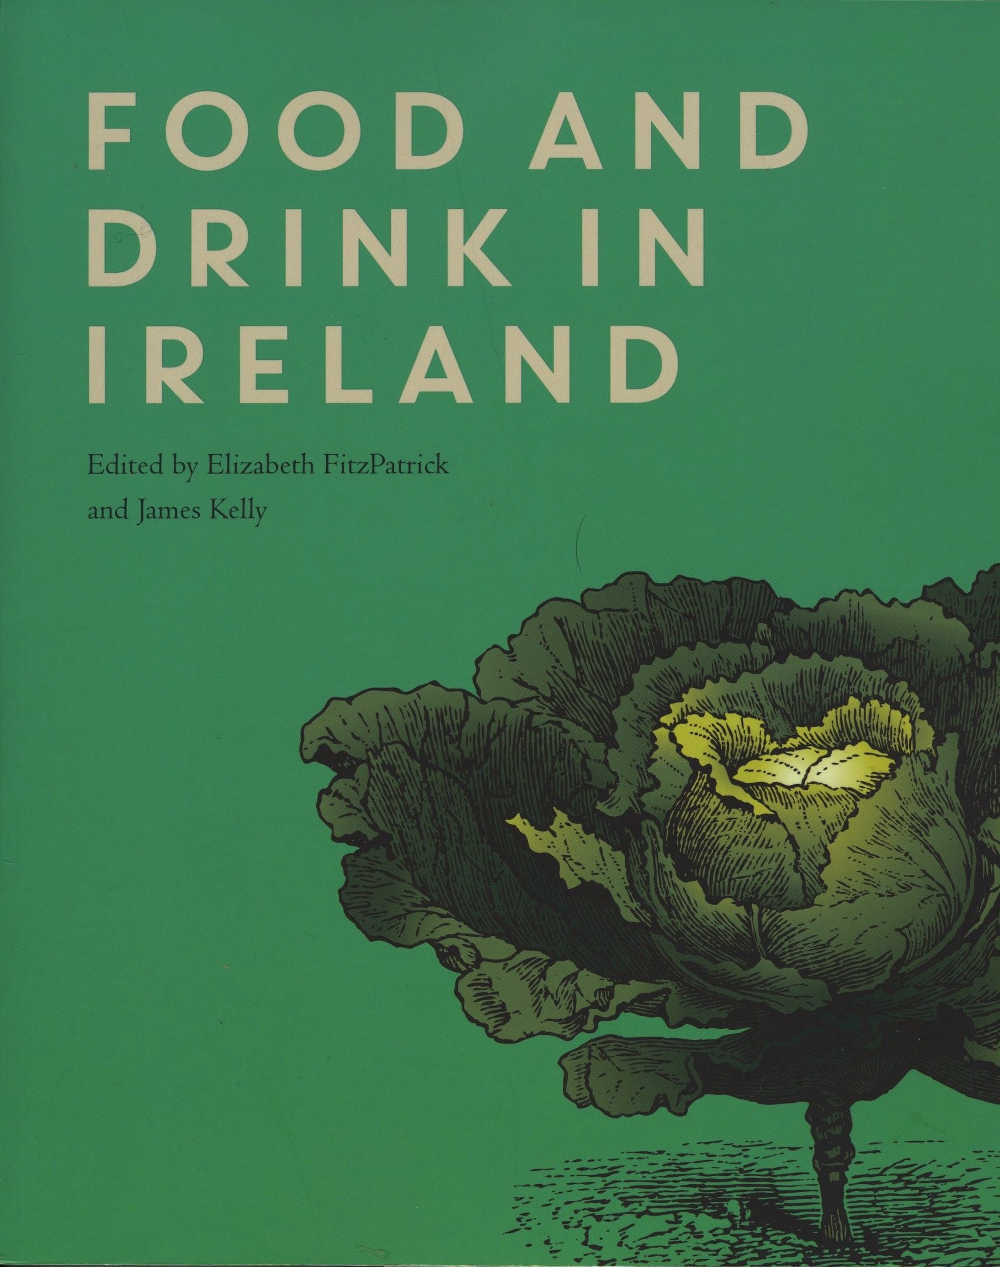 FOOD AND DRINK IN IRELAND, Edited by Elizabeth FitzPatrick and James Kelly (Royal Irish Academy; paperback; 430pp; €25 from ria.ie)